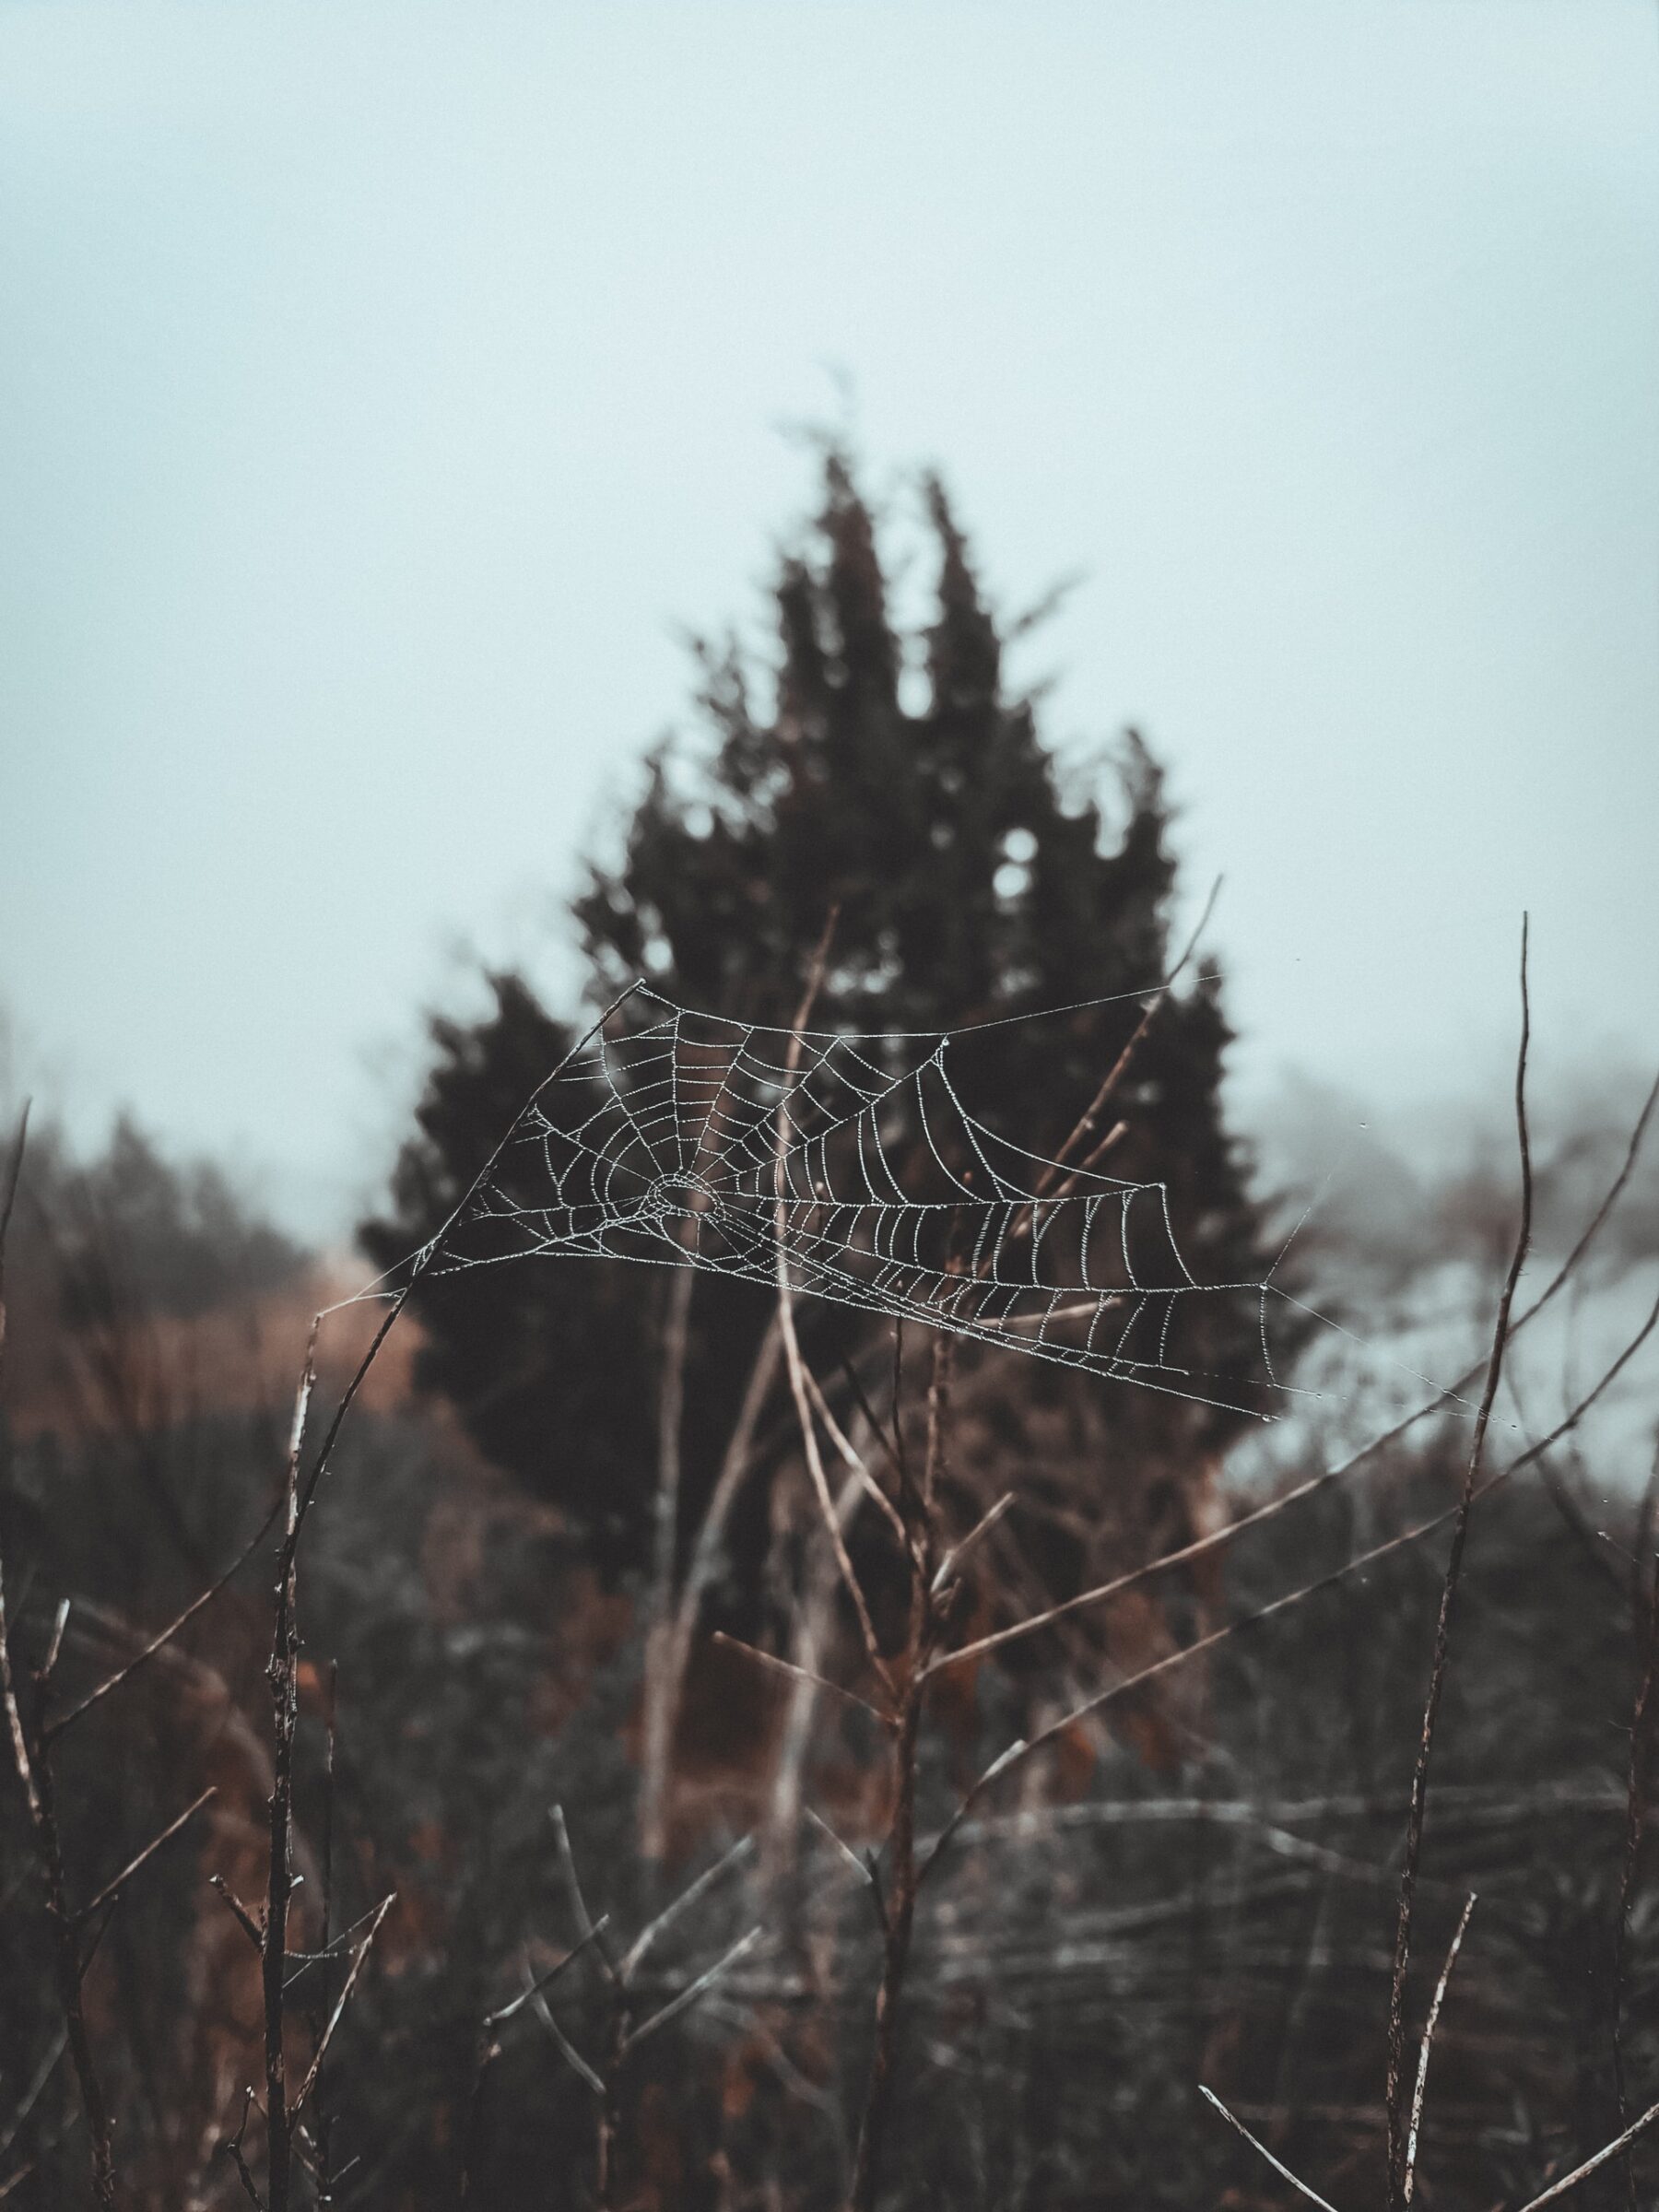 A spider web hanging between tree branches outside in a forest.